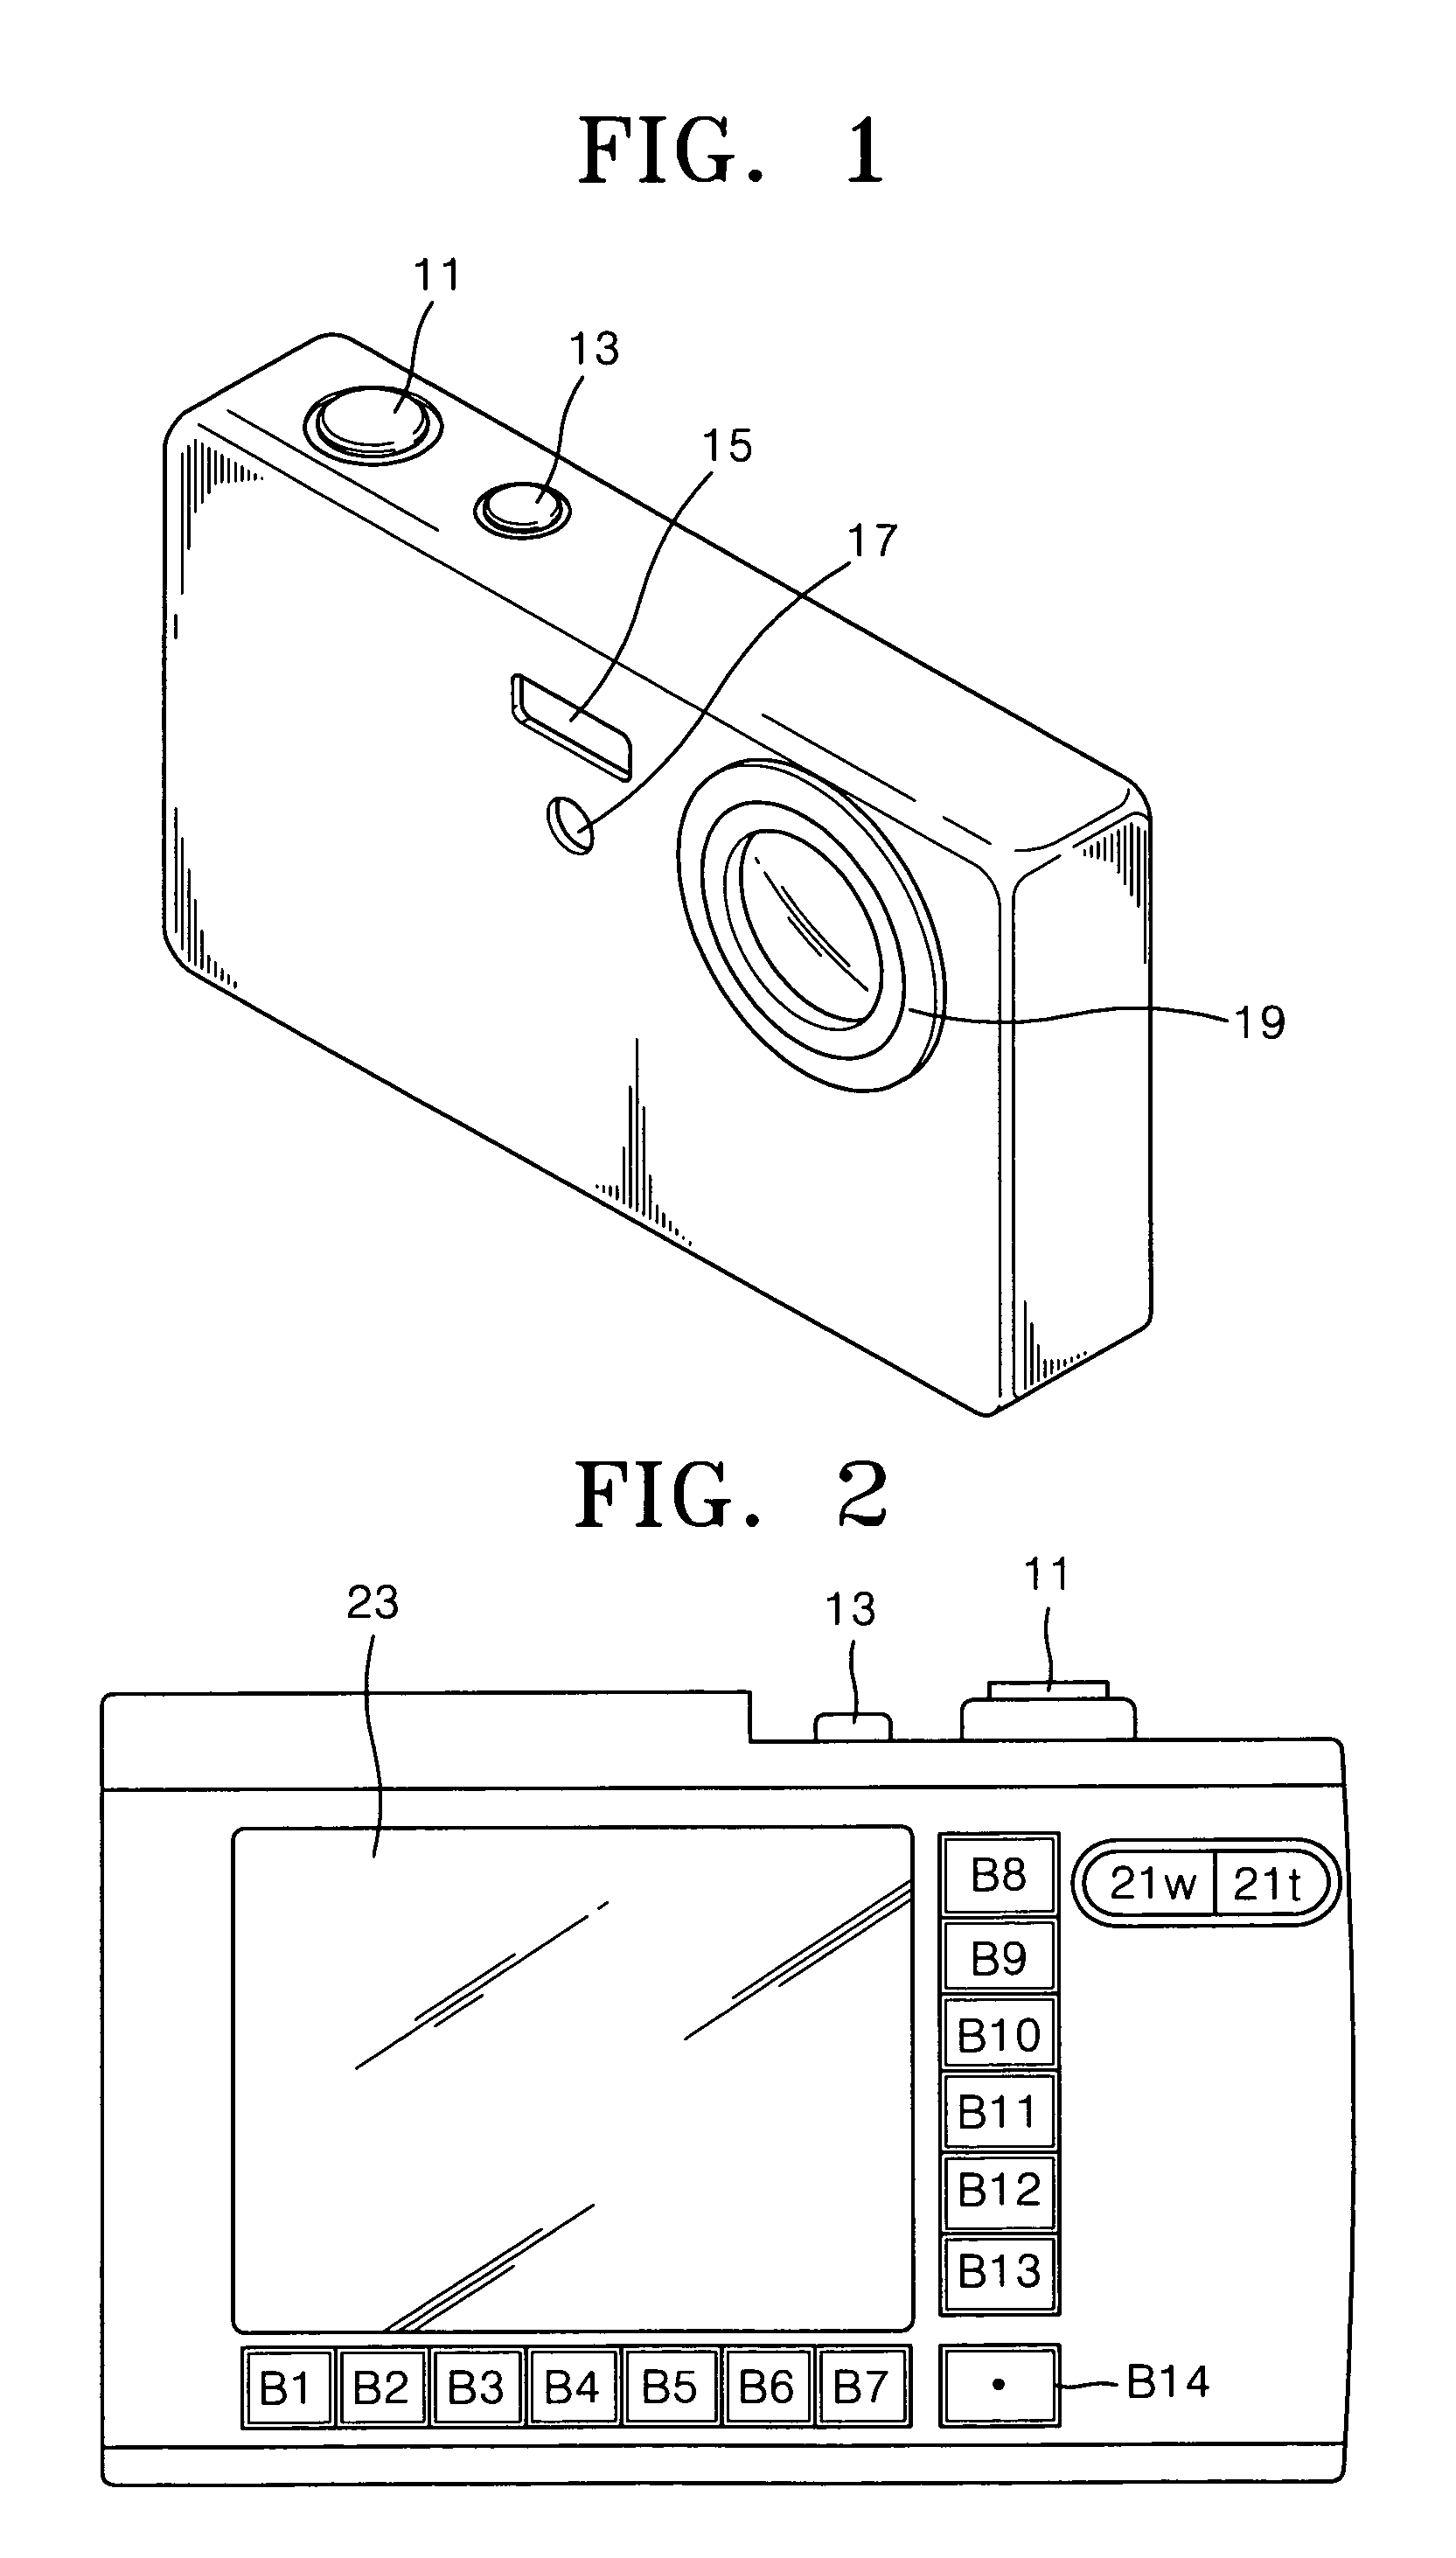 Bracketing apparatus and method for use in digital image processor